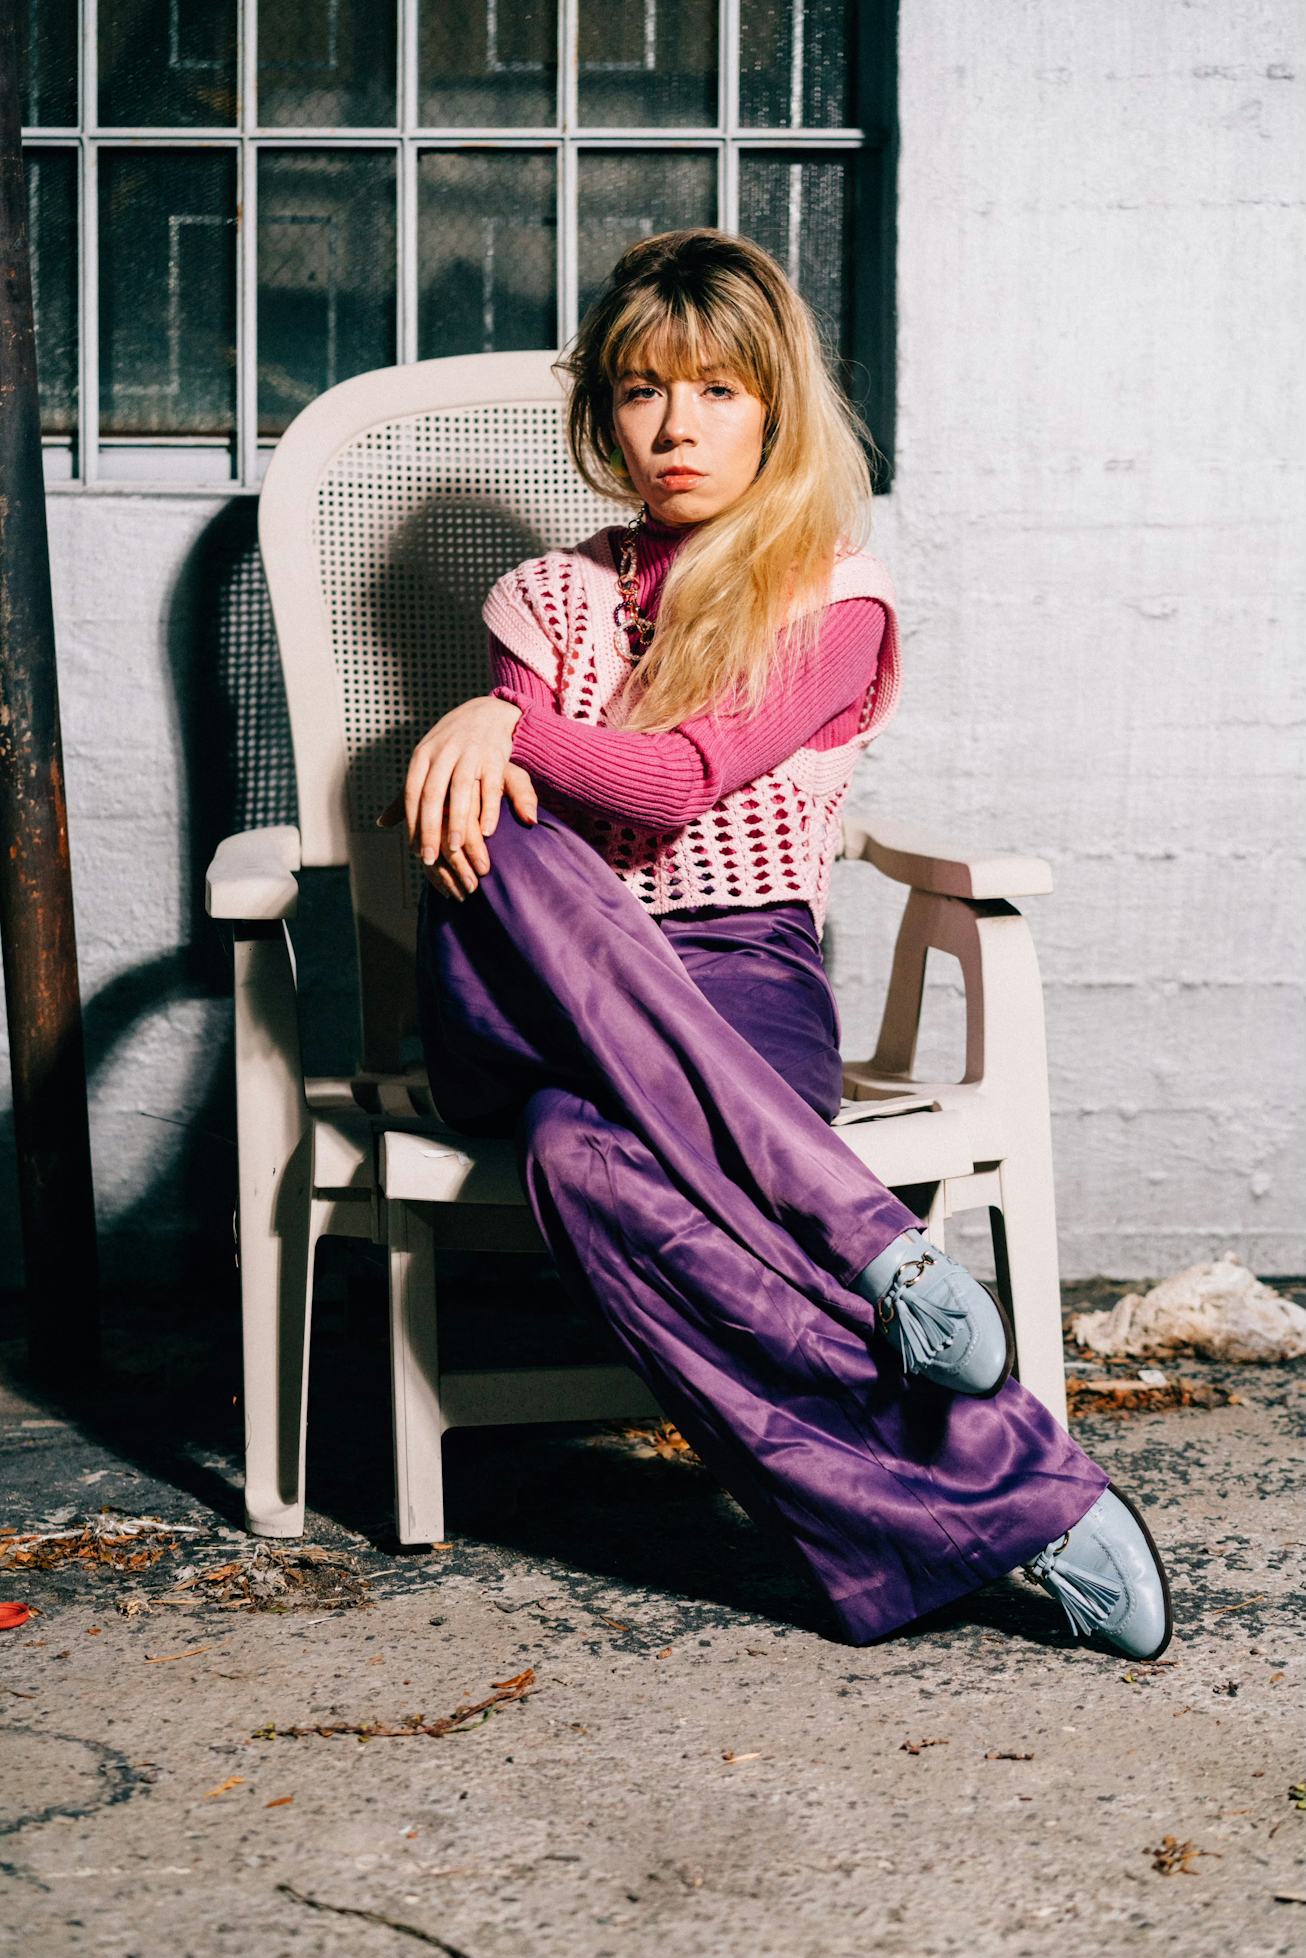 Jennette McCurdy on 'I'm Glad My Mom Died'